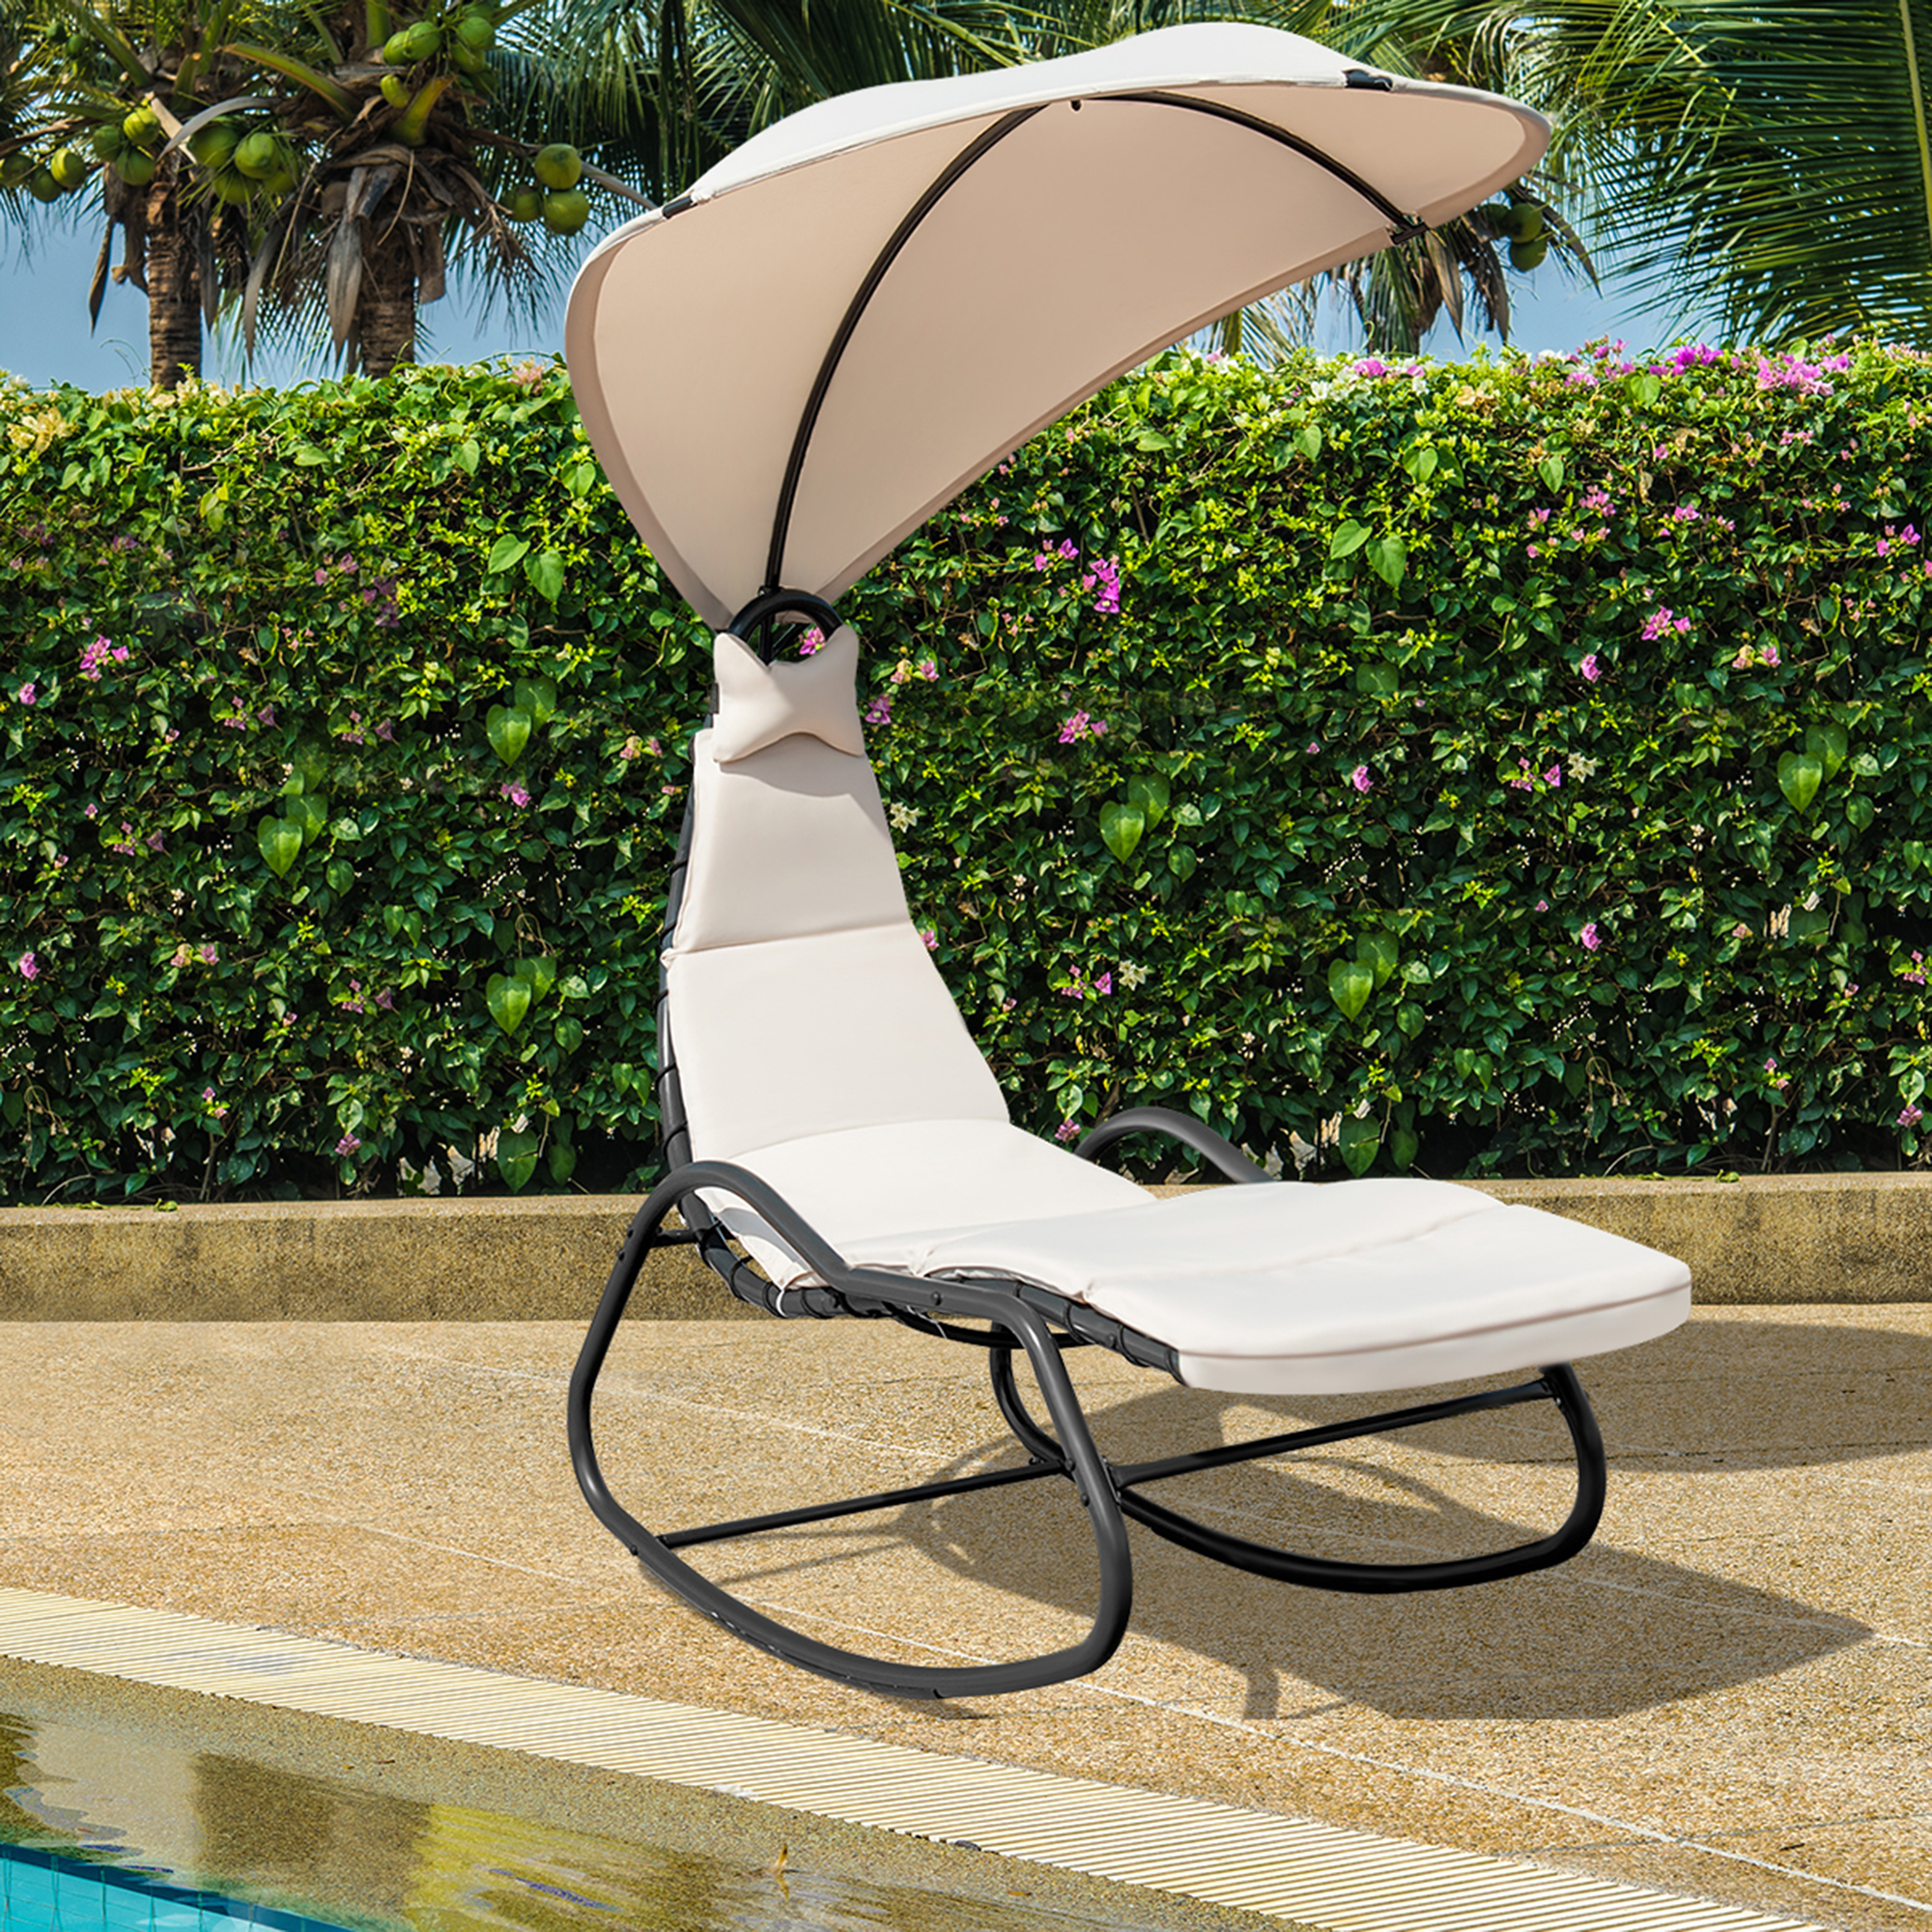 Gymax Patio Lounge Chair Chaise Garden Yard w/ Steel Frame Cushion Canopy Beige - image 1 of 10